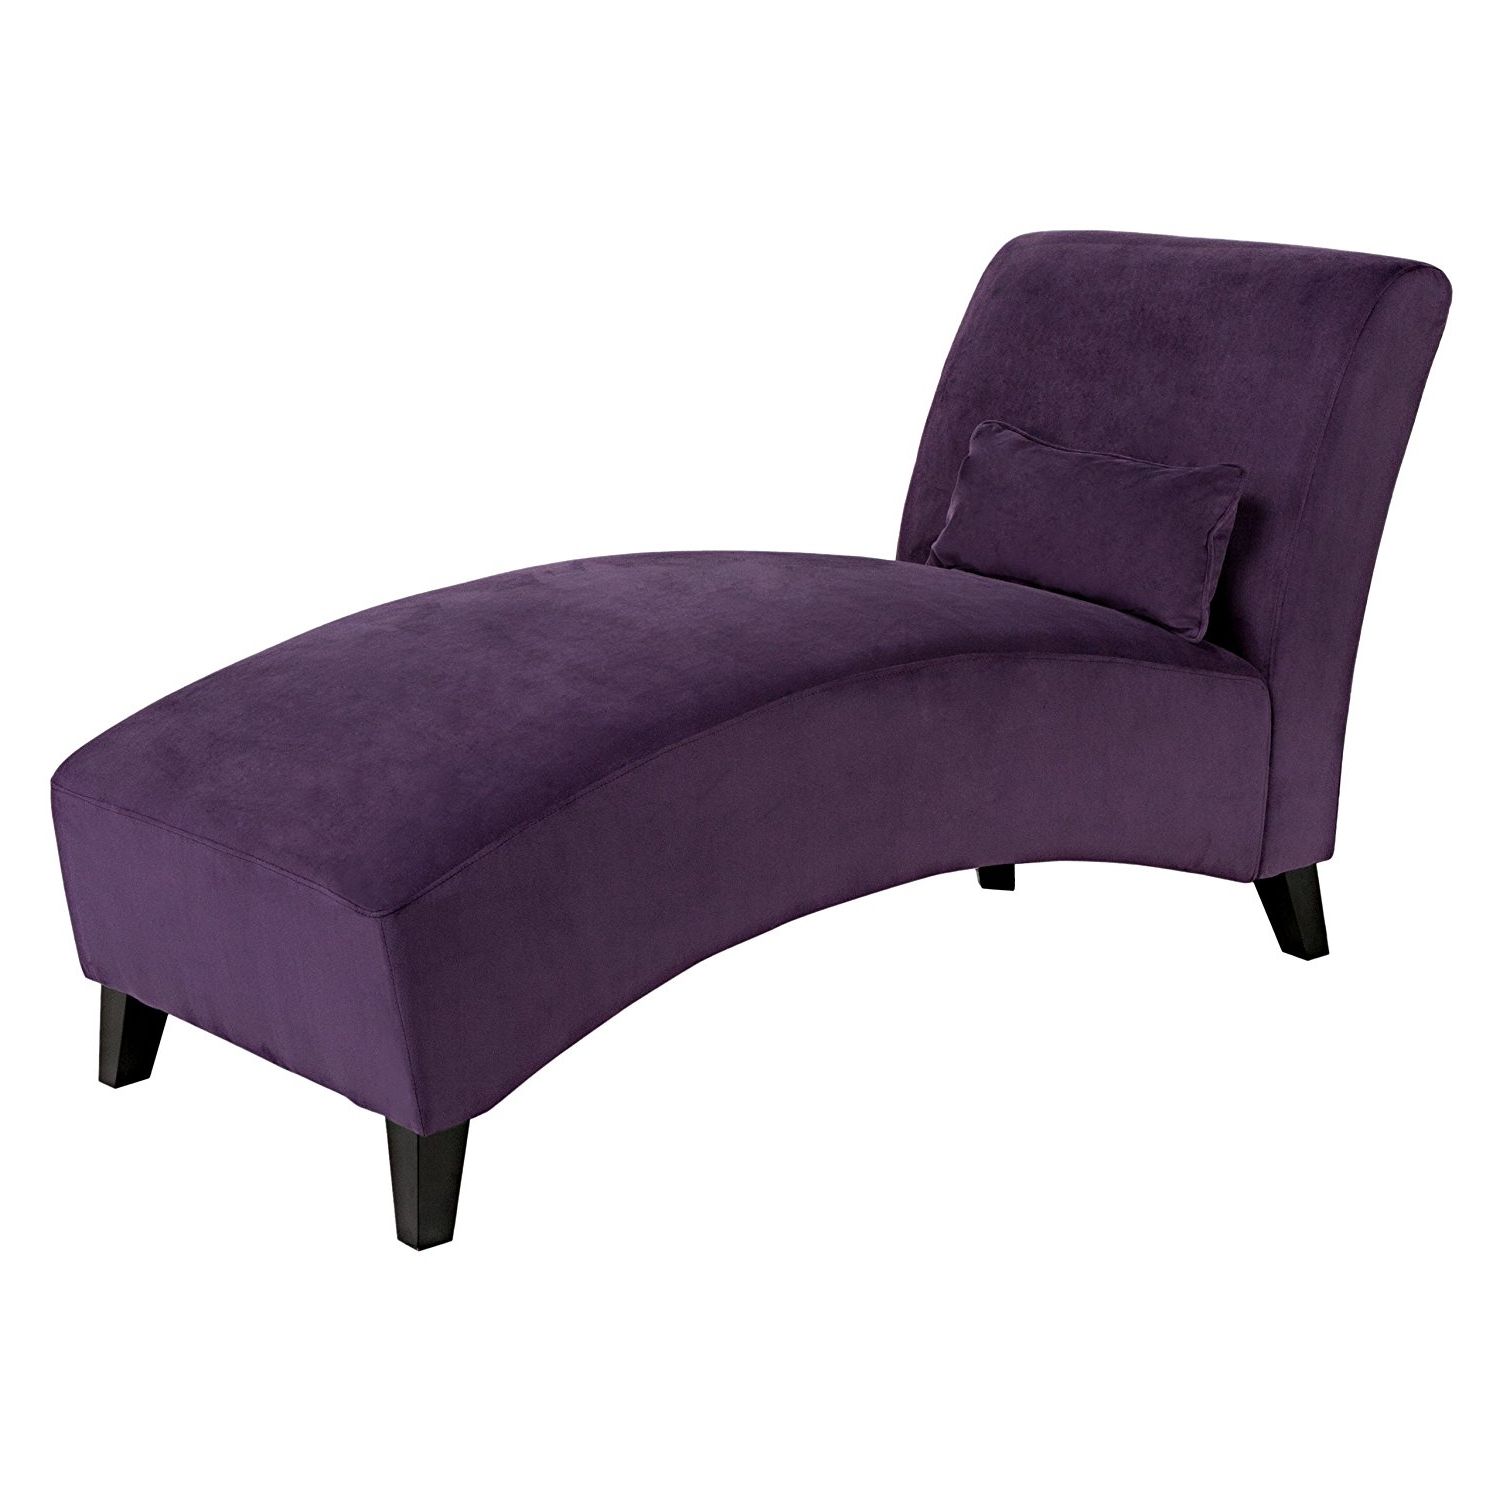 Well Known Amazon: Handy Living Chaise Lounge Chair, Purple: Kitchen & Dining Inside Velvet Chaise Lounge Chairs (View 2 of 15)